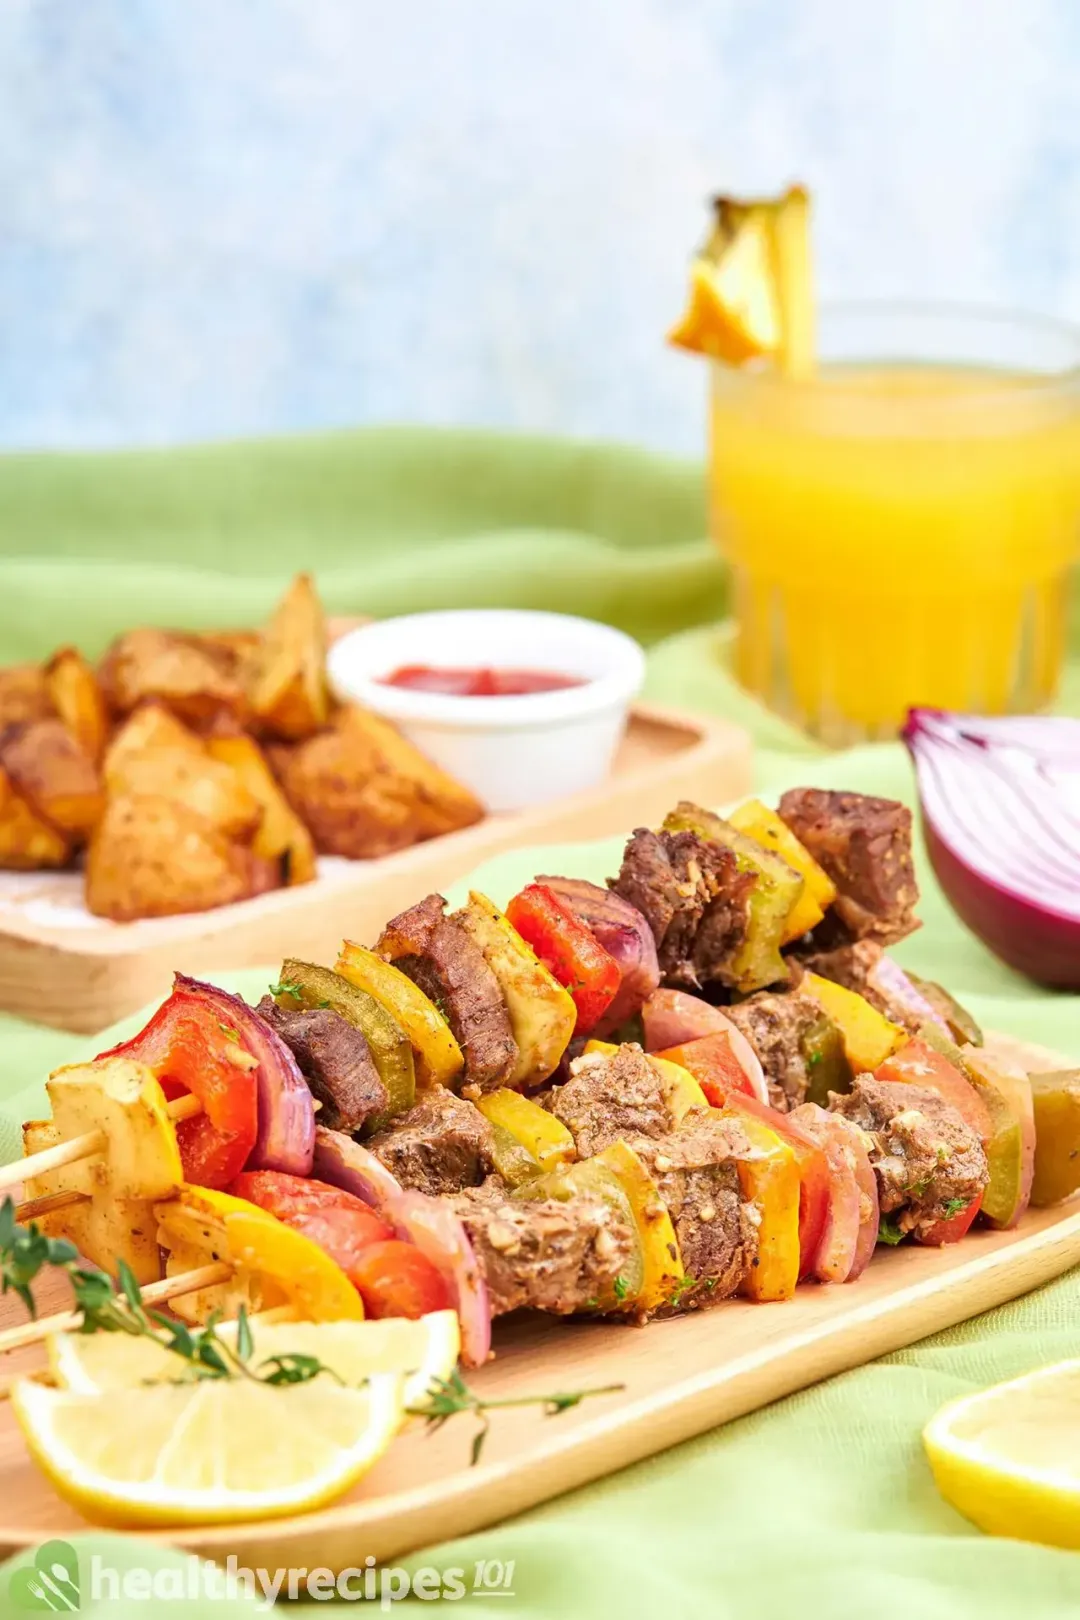 What to Serve With These Beef Kabobs